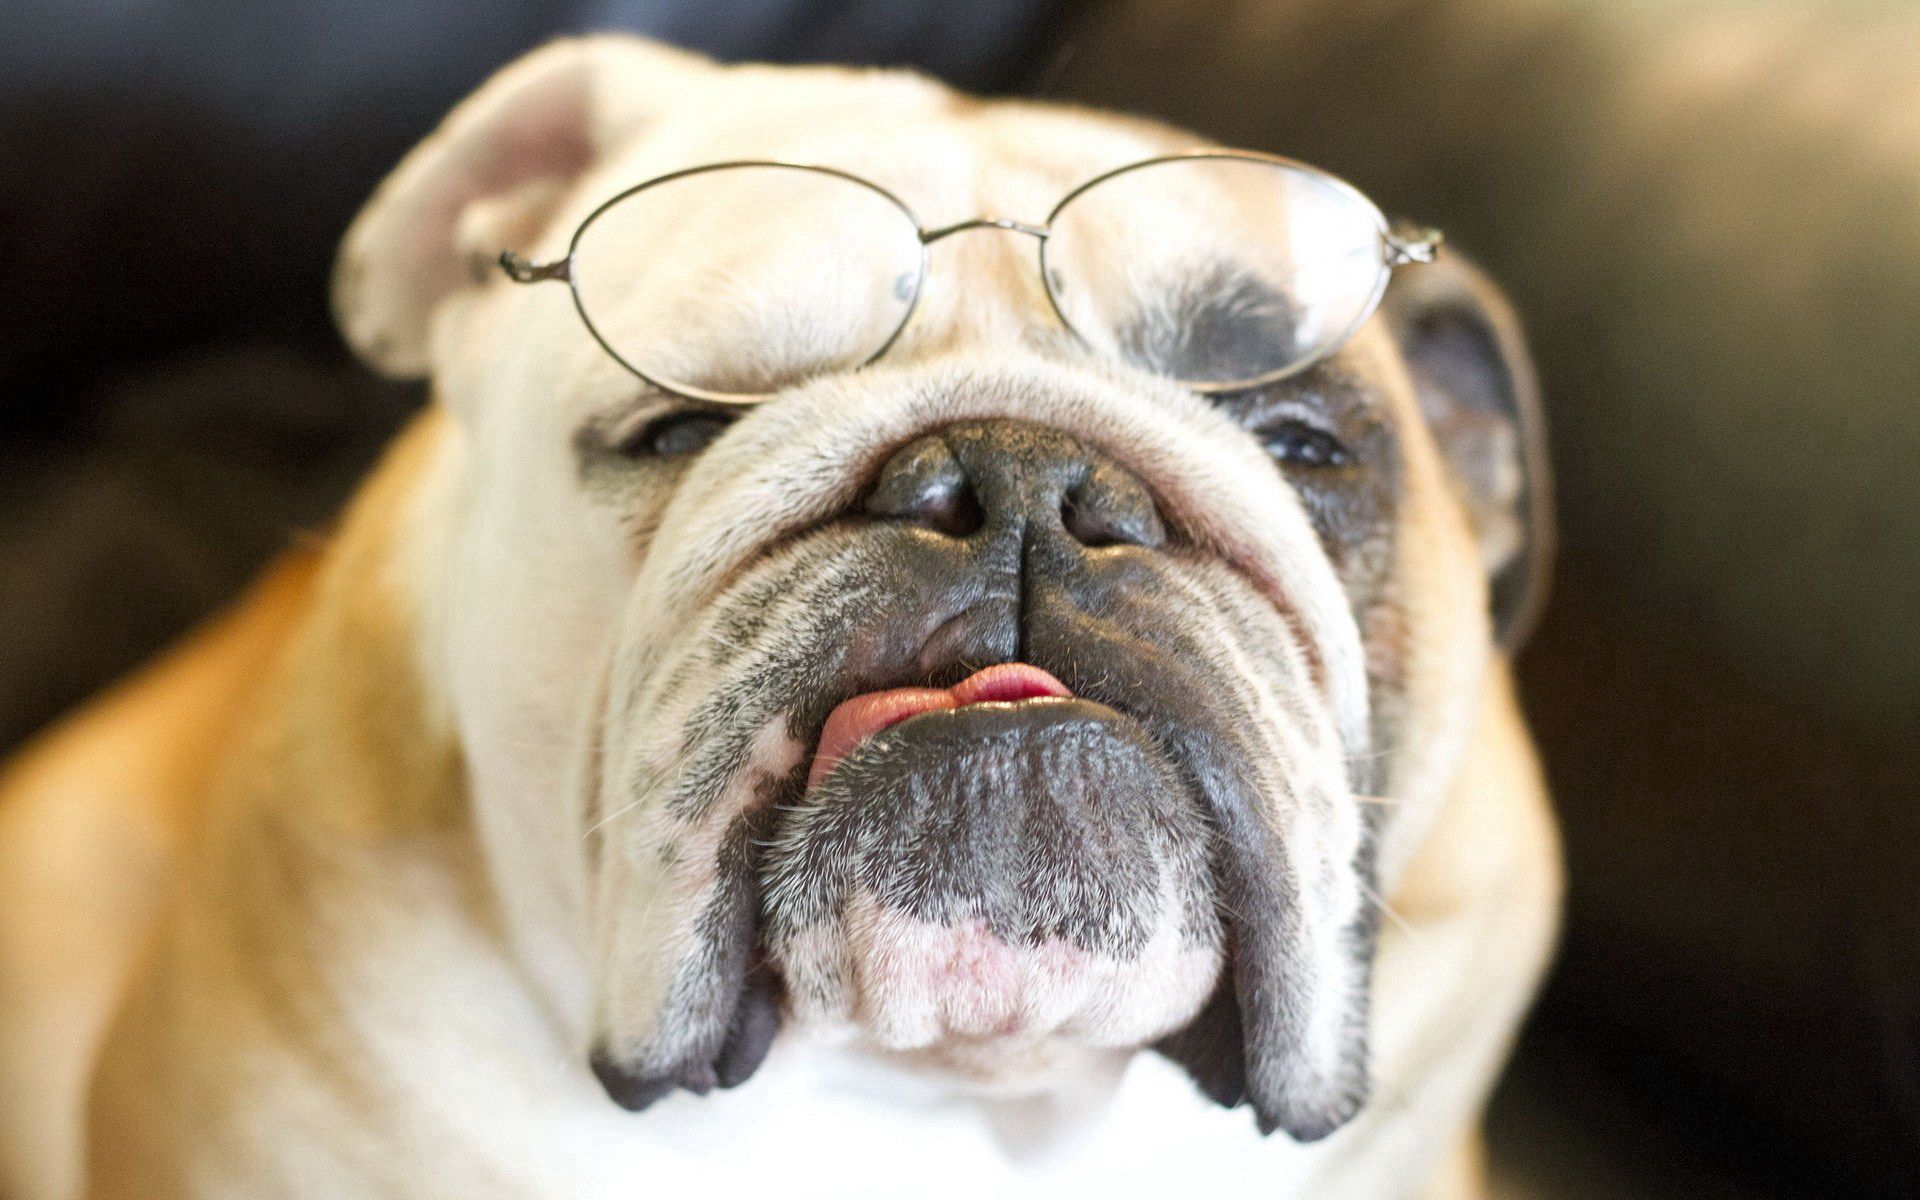 108113 Screensavers and Wallpapers Glasses for phone. Download animals, dog, muzzle, sight, opinion, glasses, spectacles, bulldog pictures for free